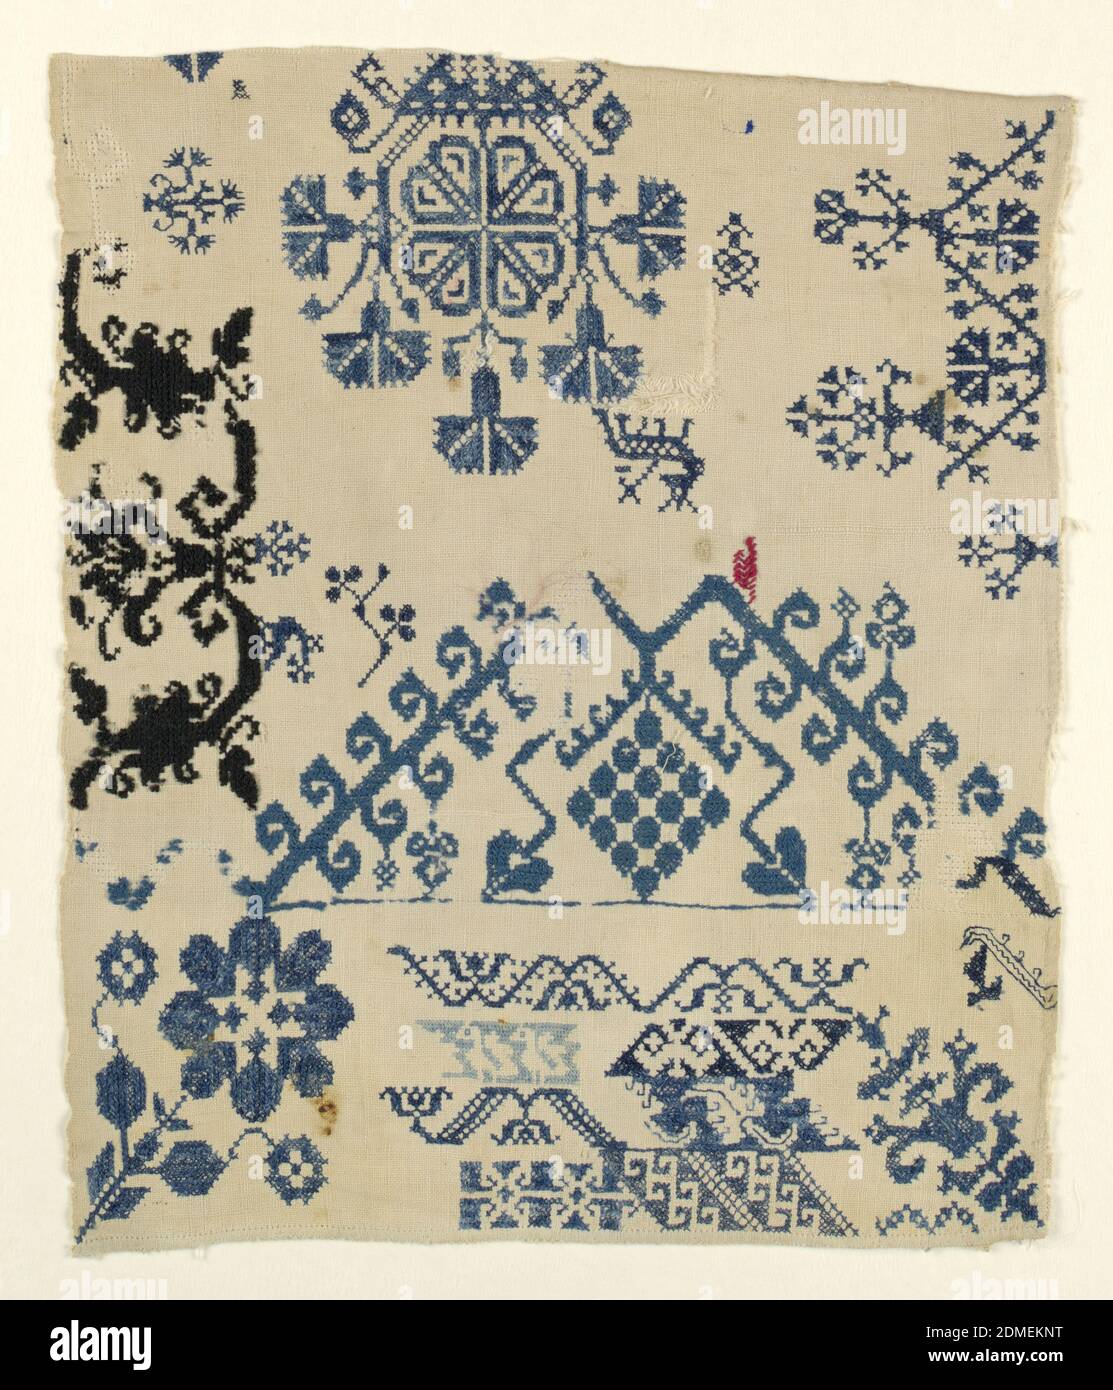 Sampler, Medium: cotton and wool embroidery, cotton foundation Technique: cross and double running stitches on plain weave, Detached patterns of conventionalized flowers., Spain, 19th century, embroidery & stitching, Sampler Stock Photo